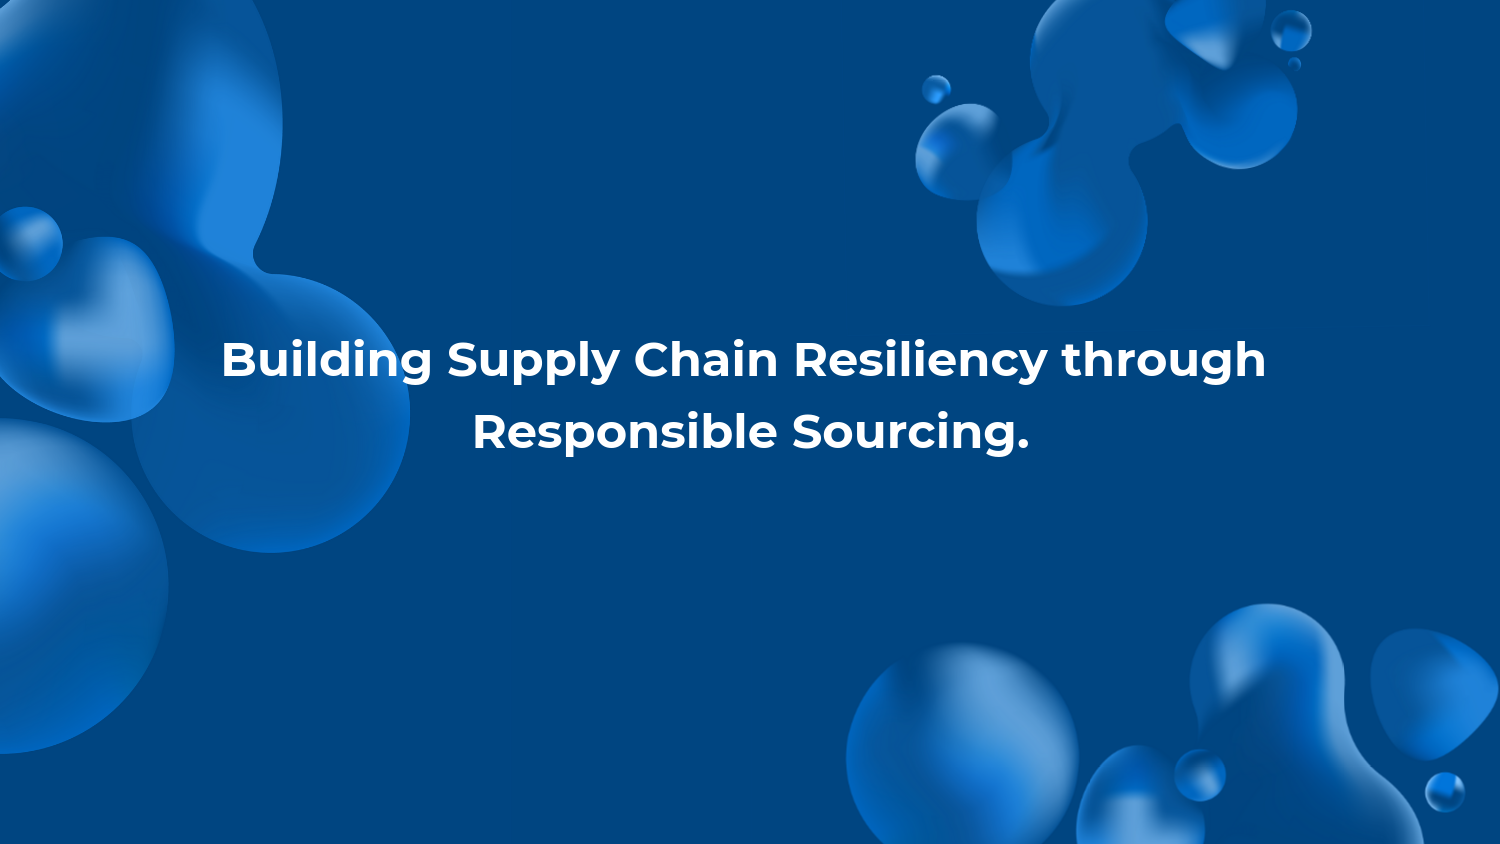 Building Supply Chain Resiliency through Responsible Sourcing